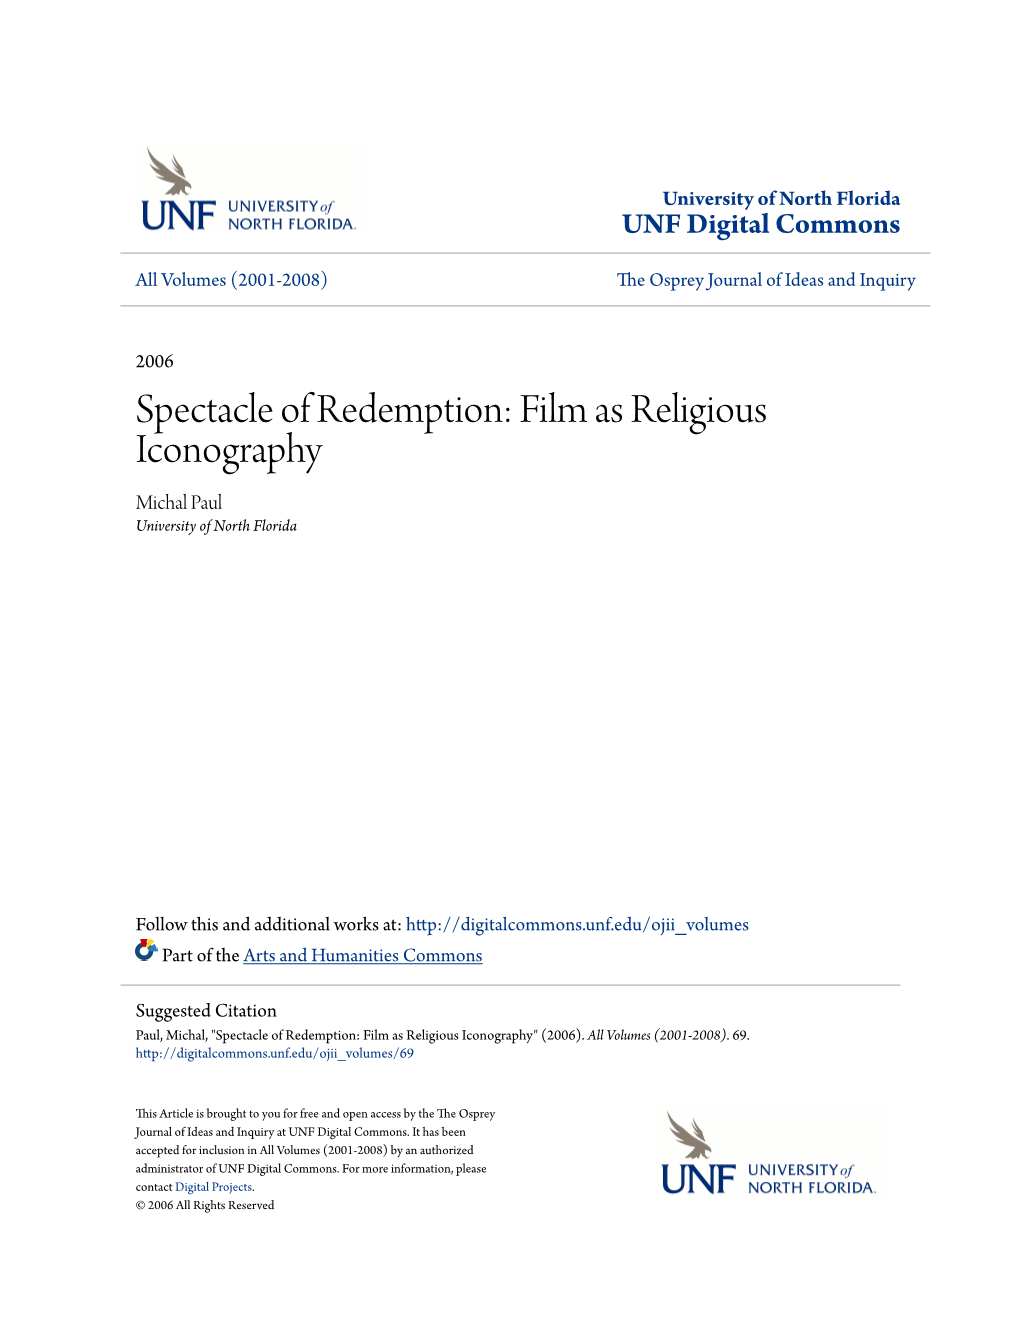 Spectacle of Redemption: Film As Religious Iconography Michal Paul University of North Florida